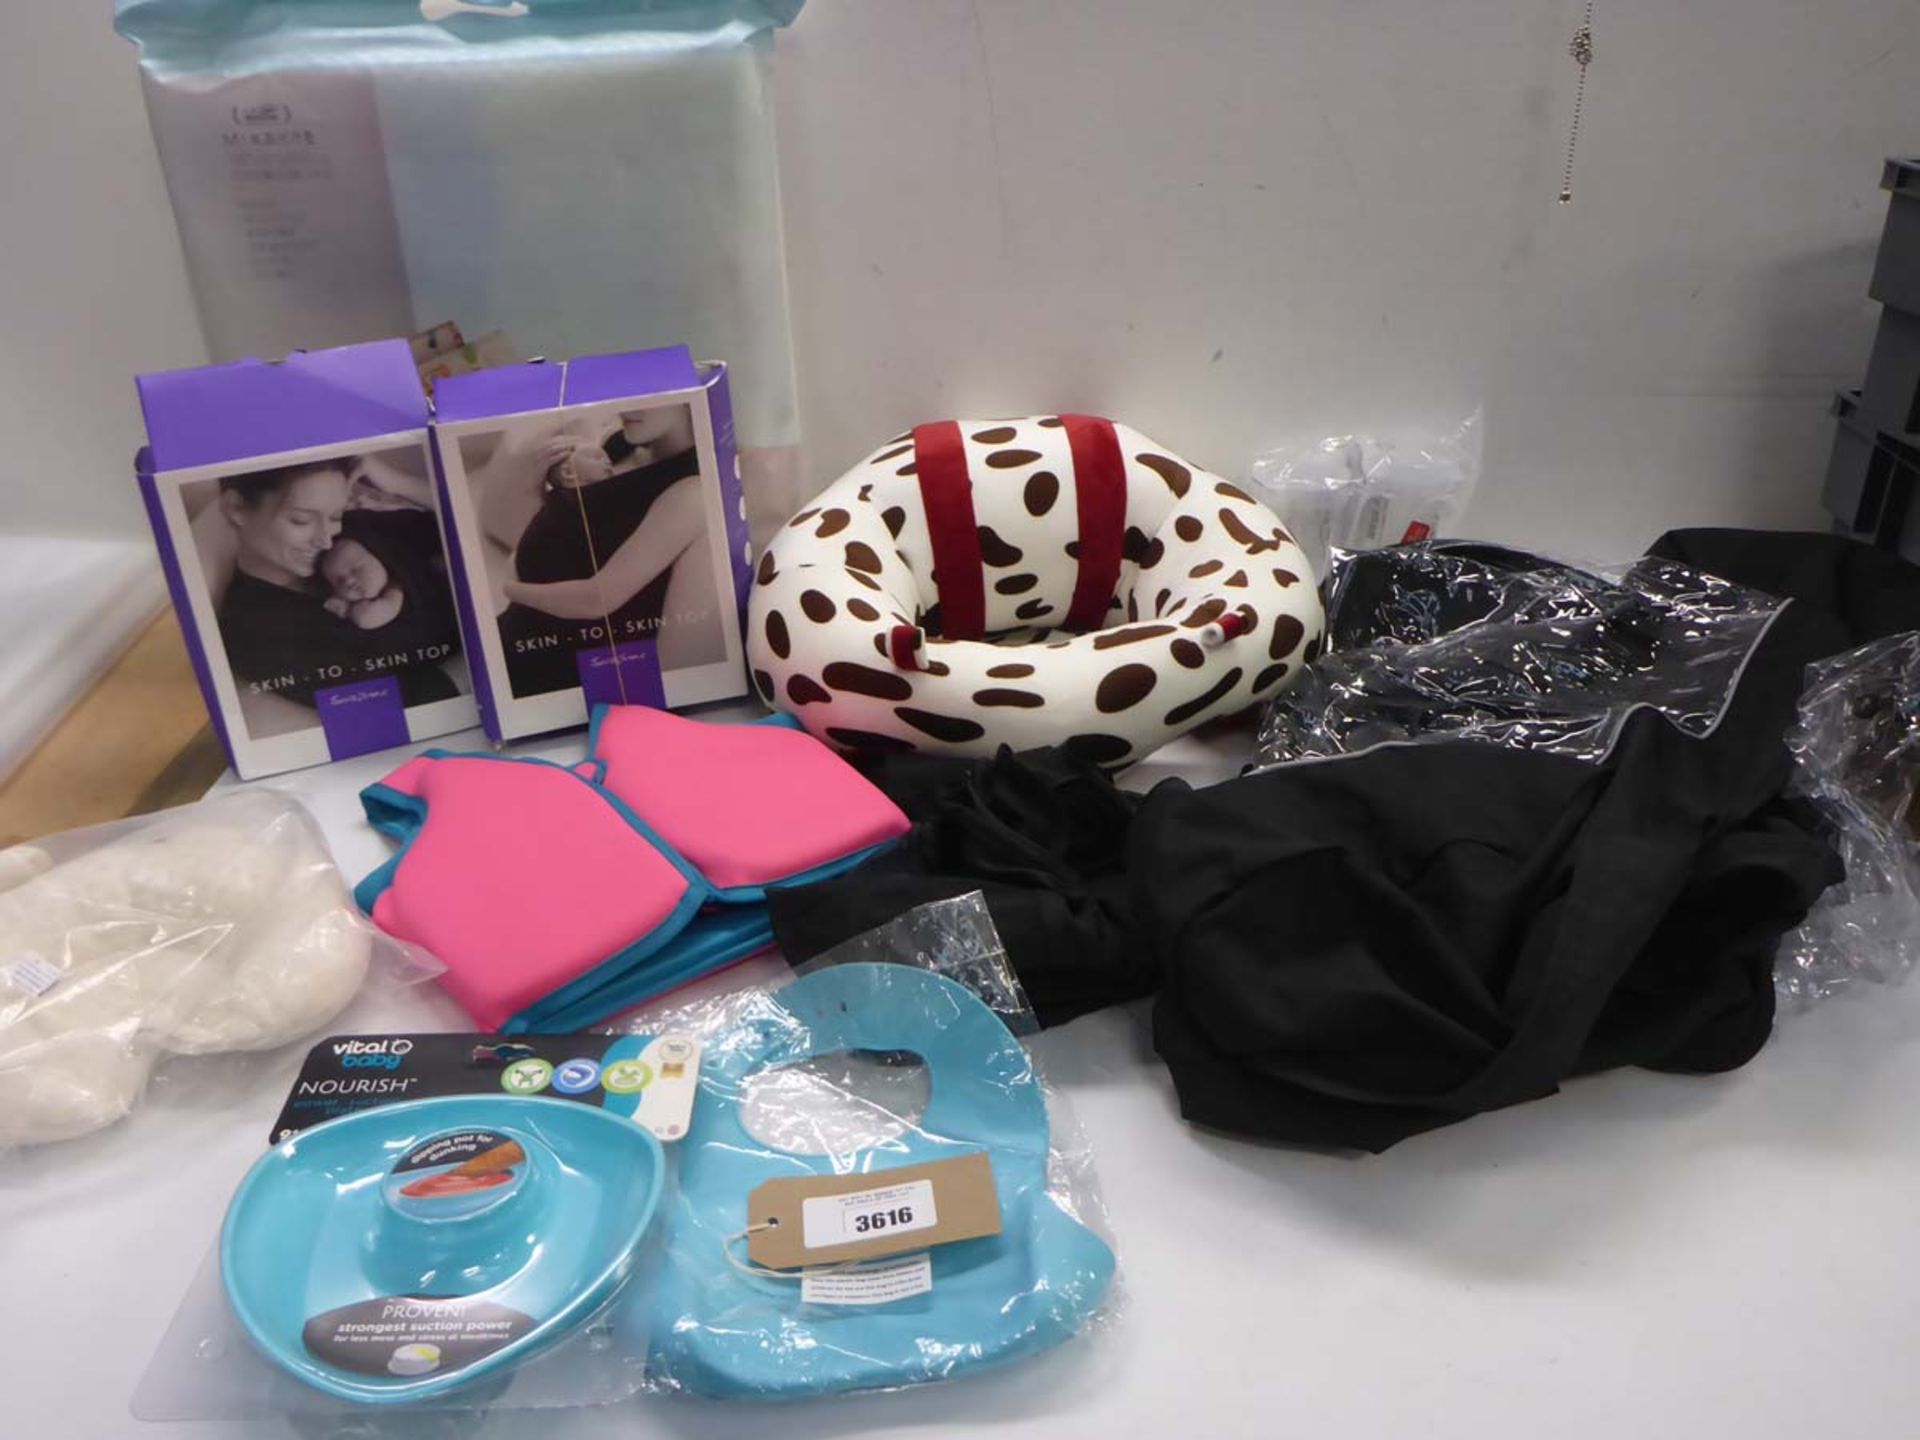 Skin to skin baby wraps, child's floatation vest, suction plate, bib, buggy covers, play mat, sit